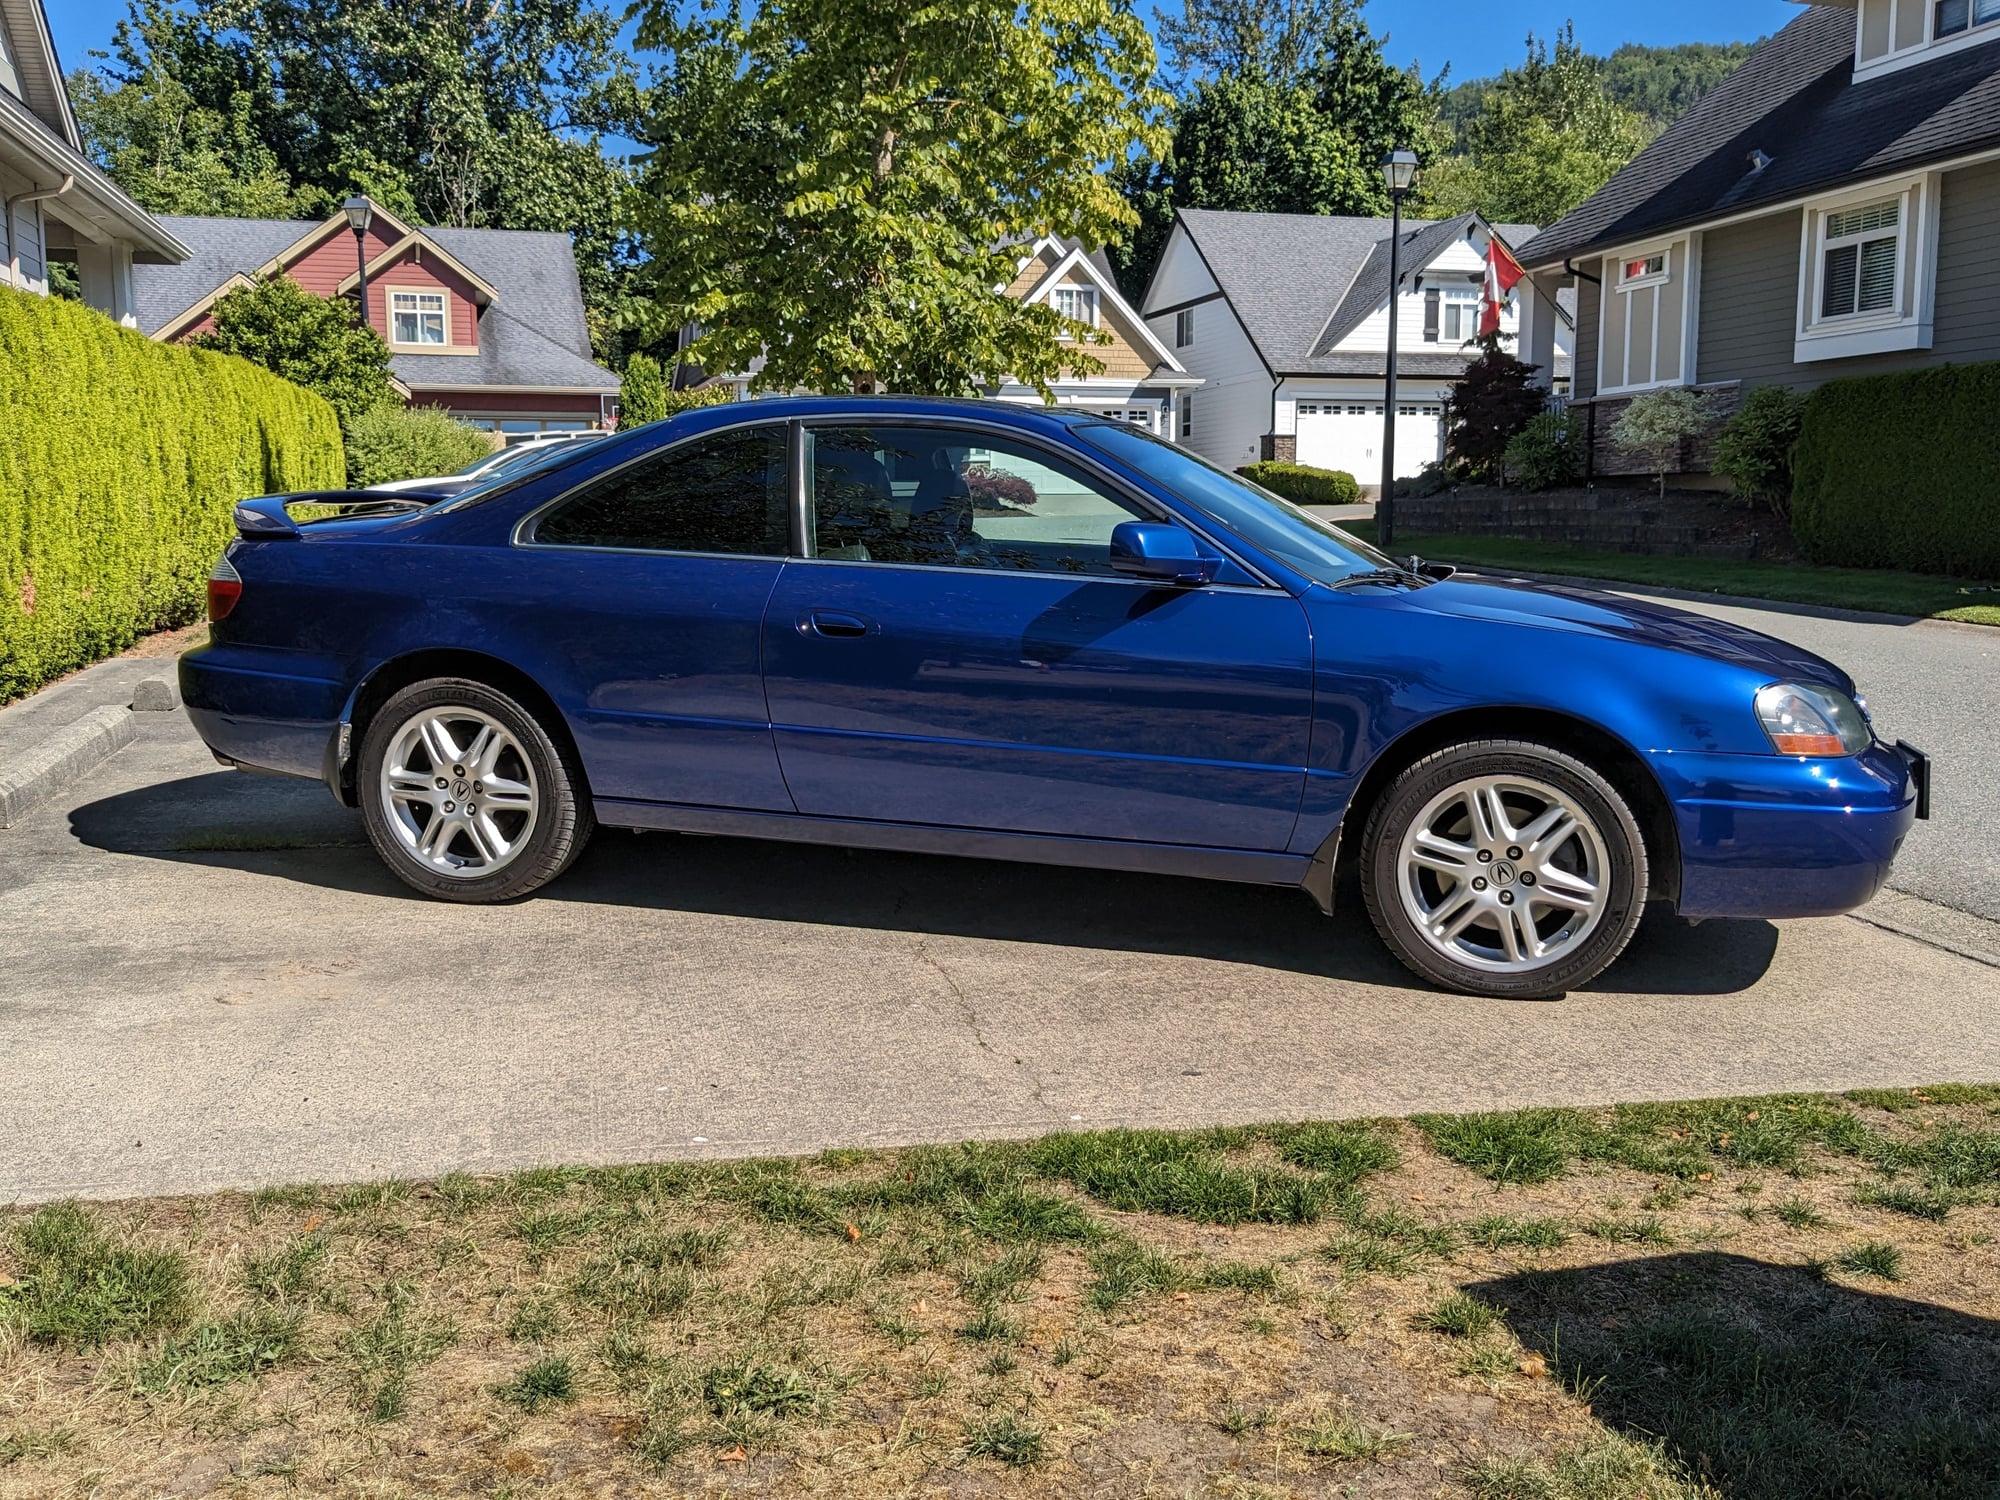 2003 Acura CL - FS: Unicorn Type S Aegean Blue 6 speed MT - Used - VIN 19UYA41653A800691 - 6 cyl - 2WD - Manual - Coupe - Blue - Abbotsford, BC V3G0A7, Canada